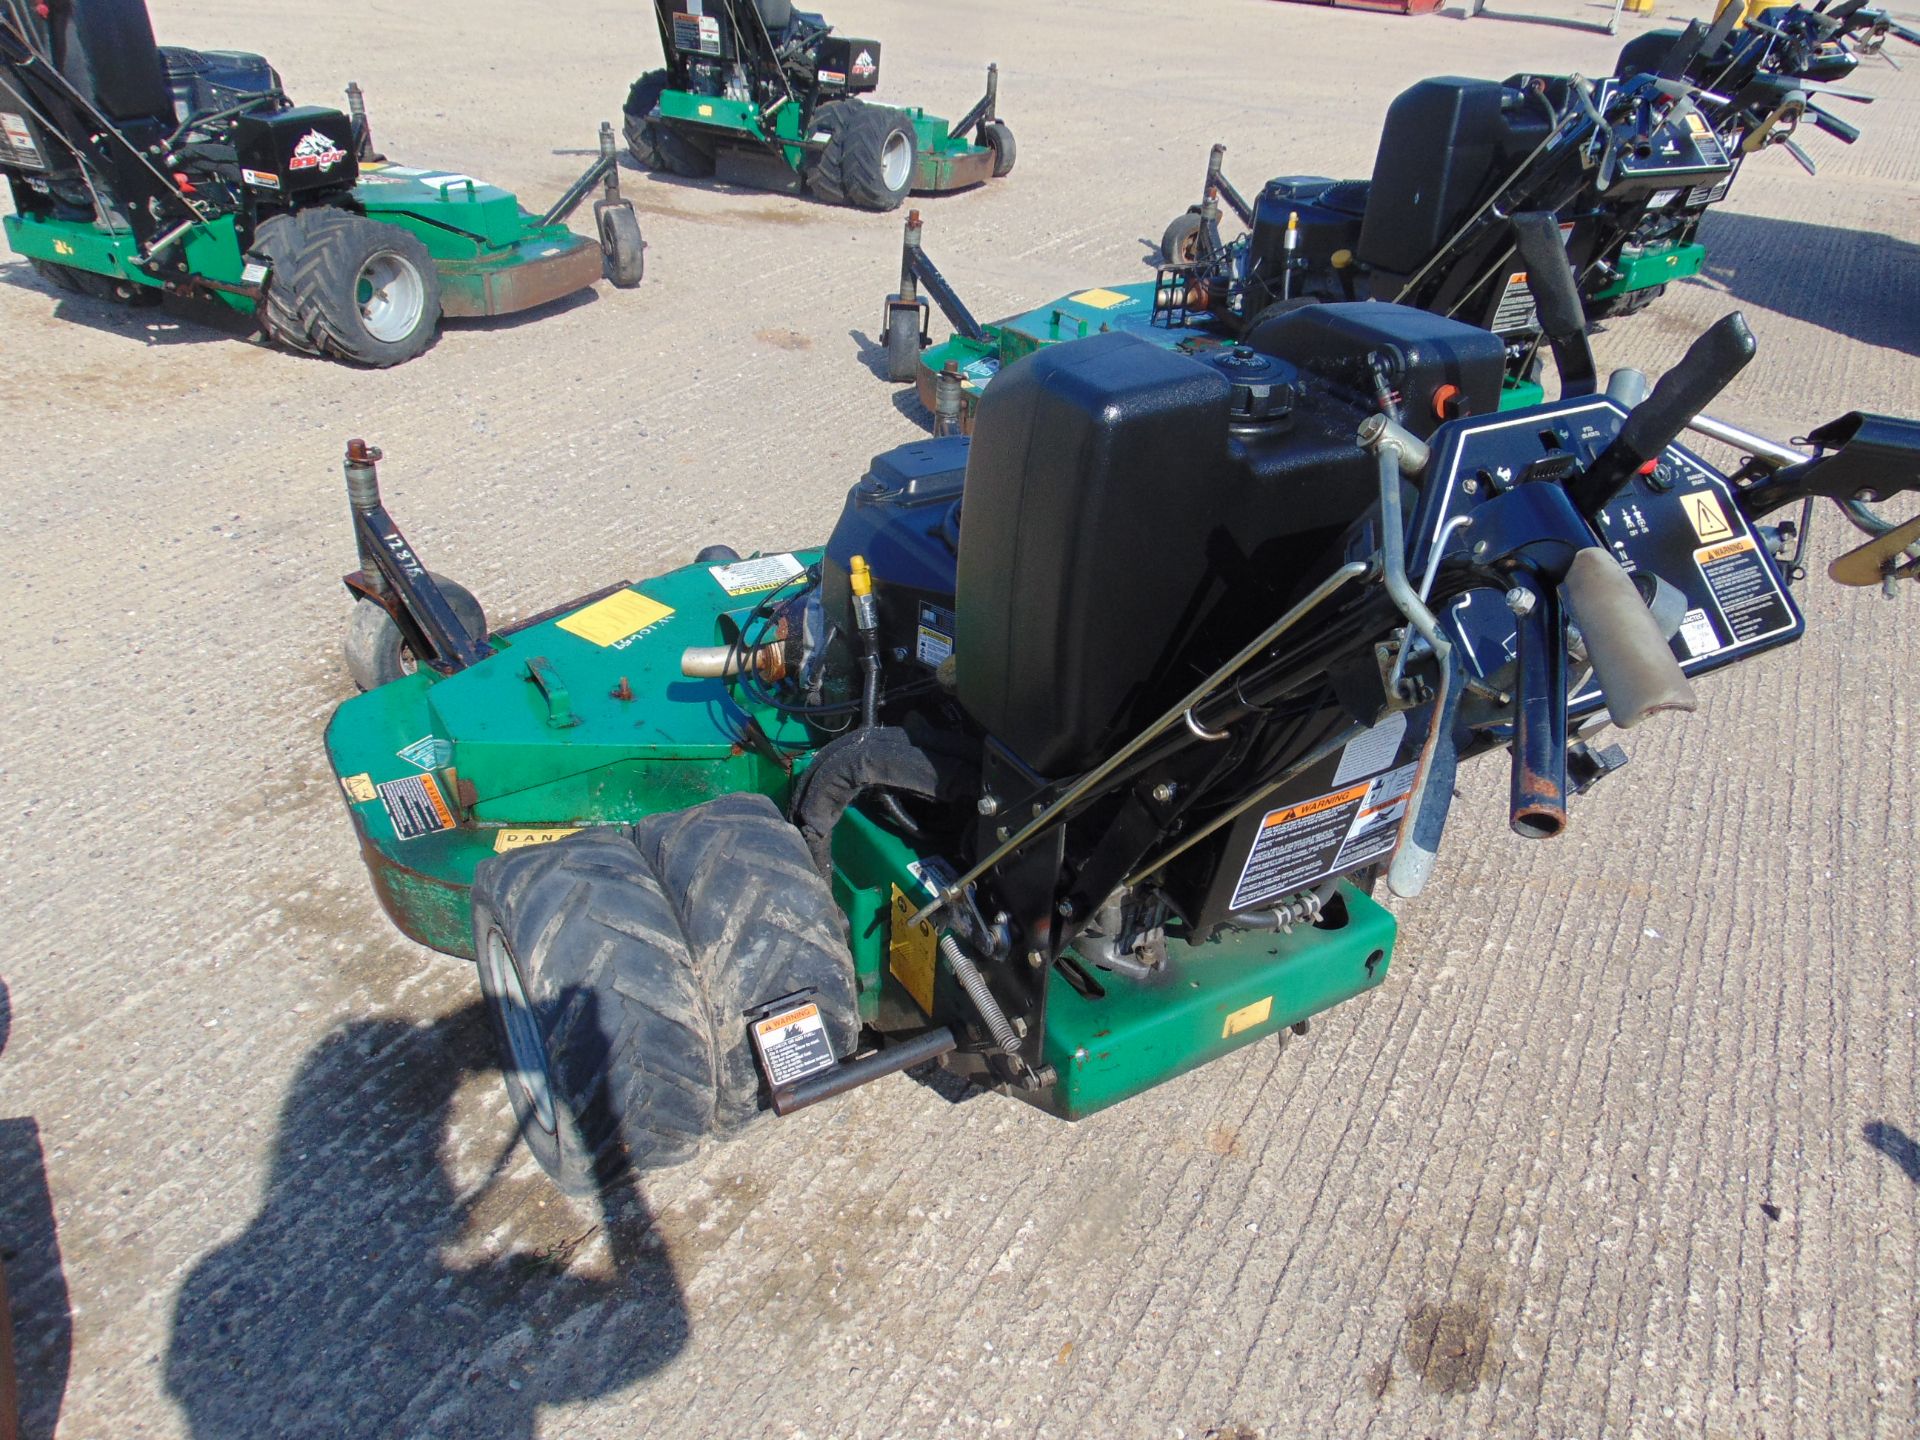 2015 BOBCAT HYDRODRIVE 52 INCHES MOWER FROM UK GOVT CONTRACT. 1287 HOURS ONLY - Image 3 of 10